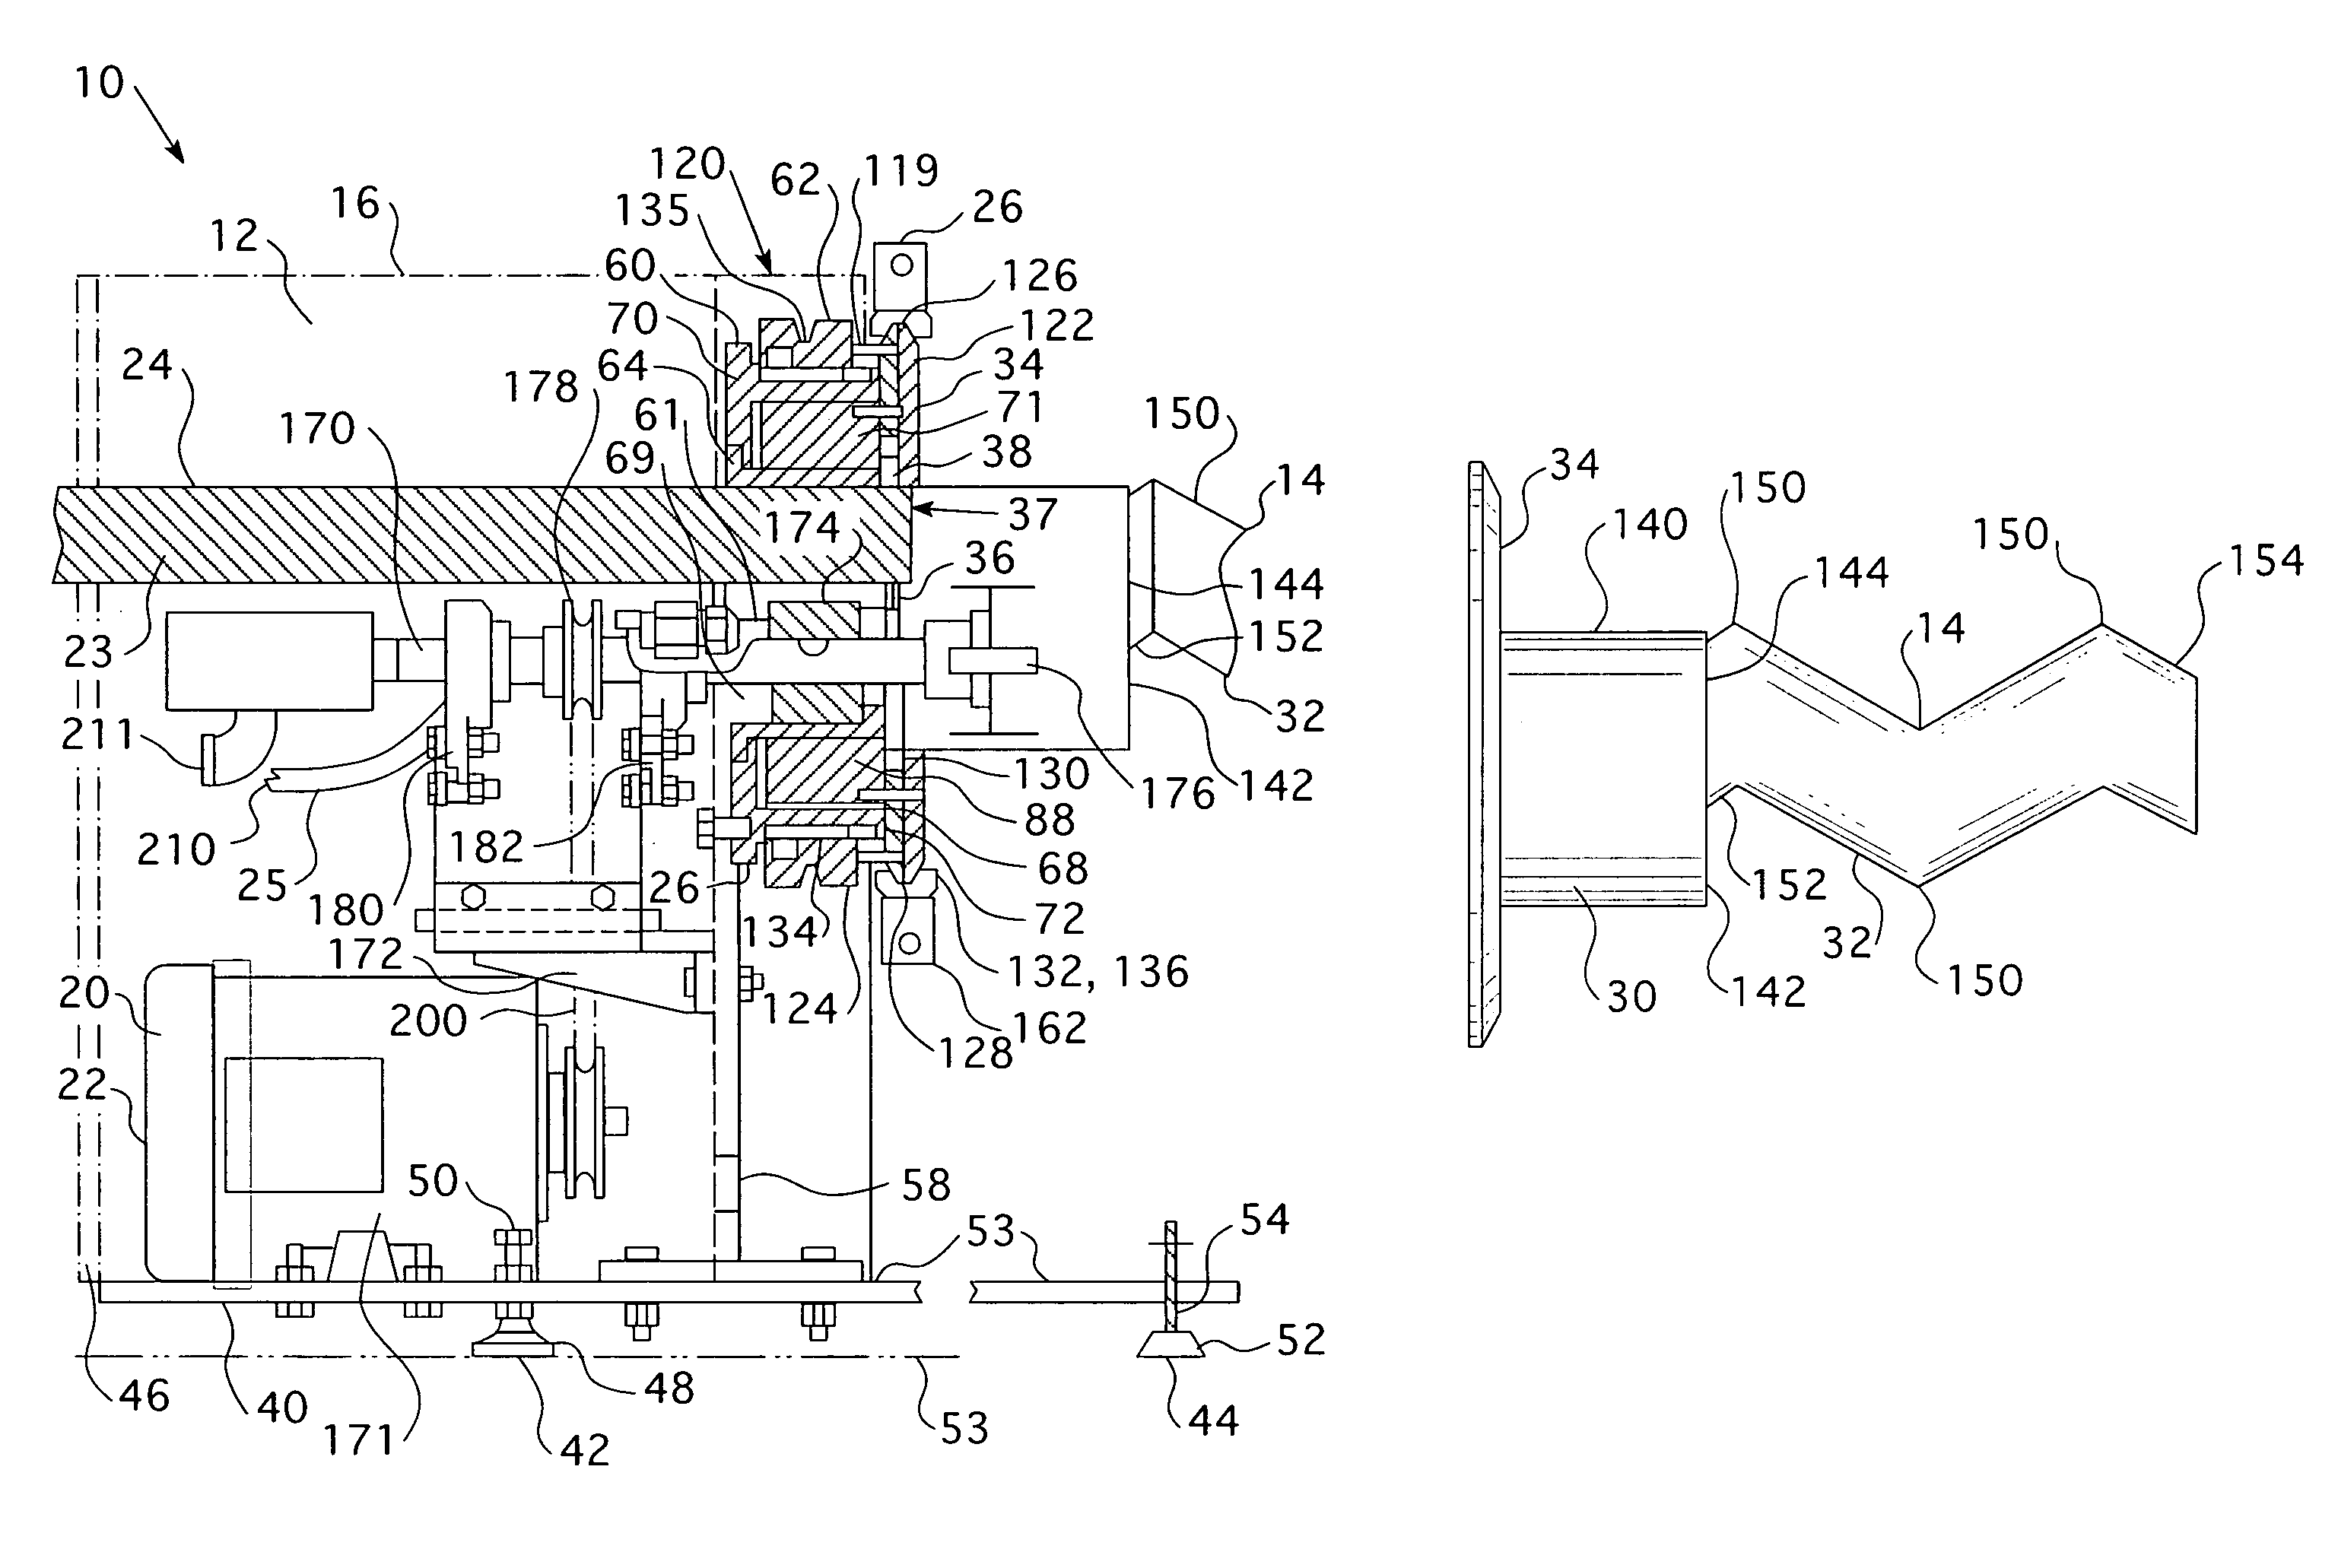 Apparatus for continuous blending